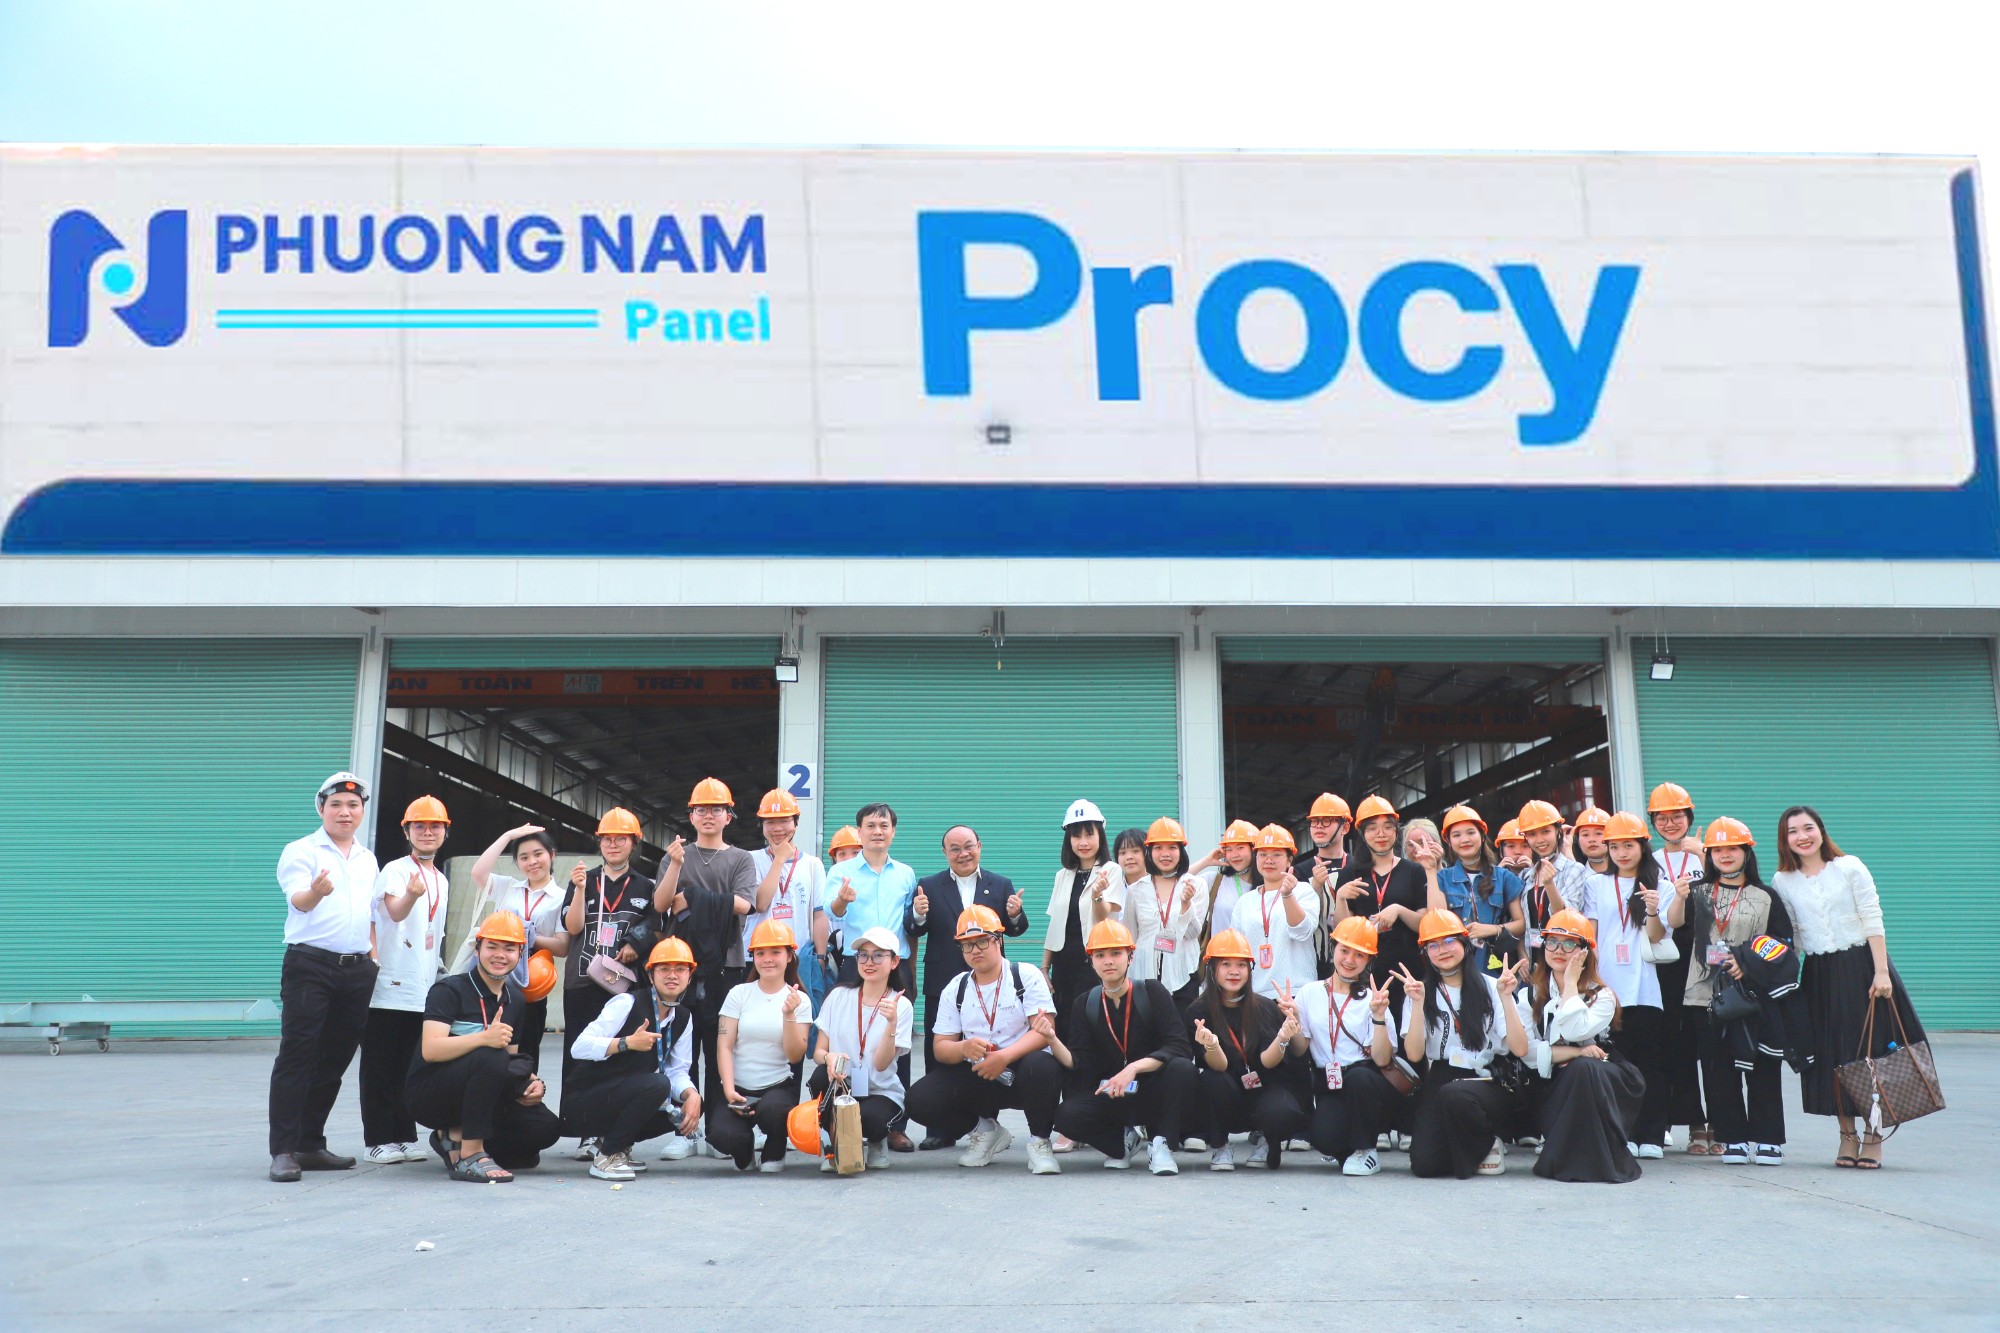 PNP | WELCOMING STUDENTS OF YERSIN UNIVERSITY DA LAT TO EXPERIMENT AT PHUONG NAM PANEL FACTORY